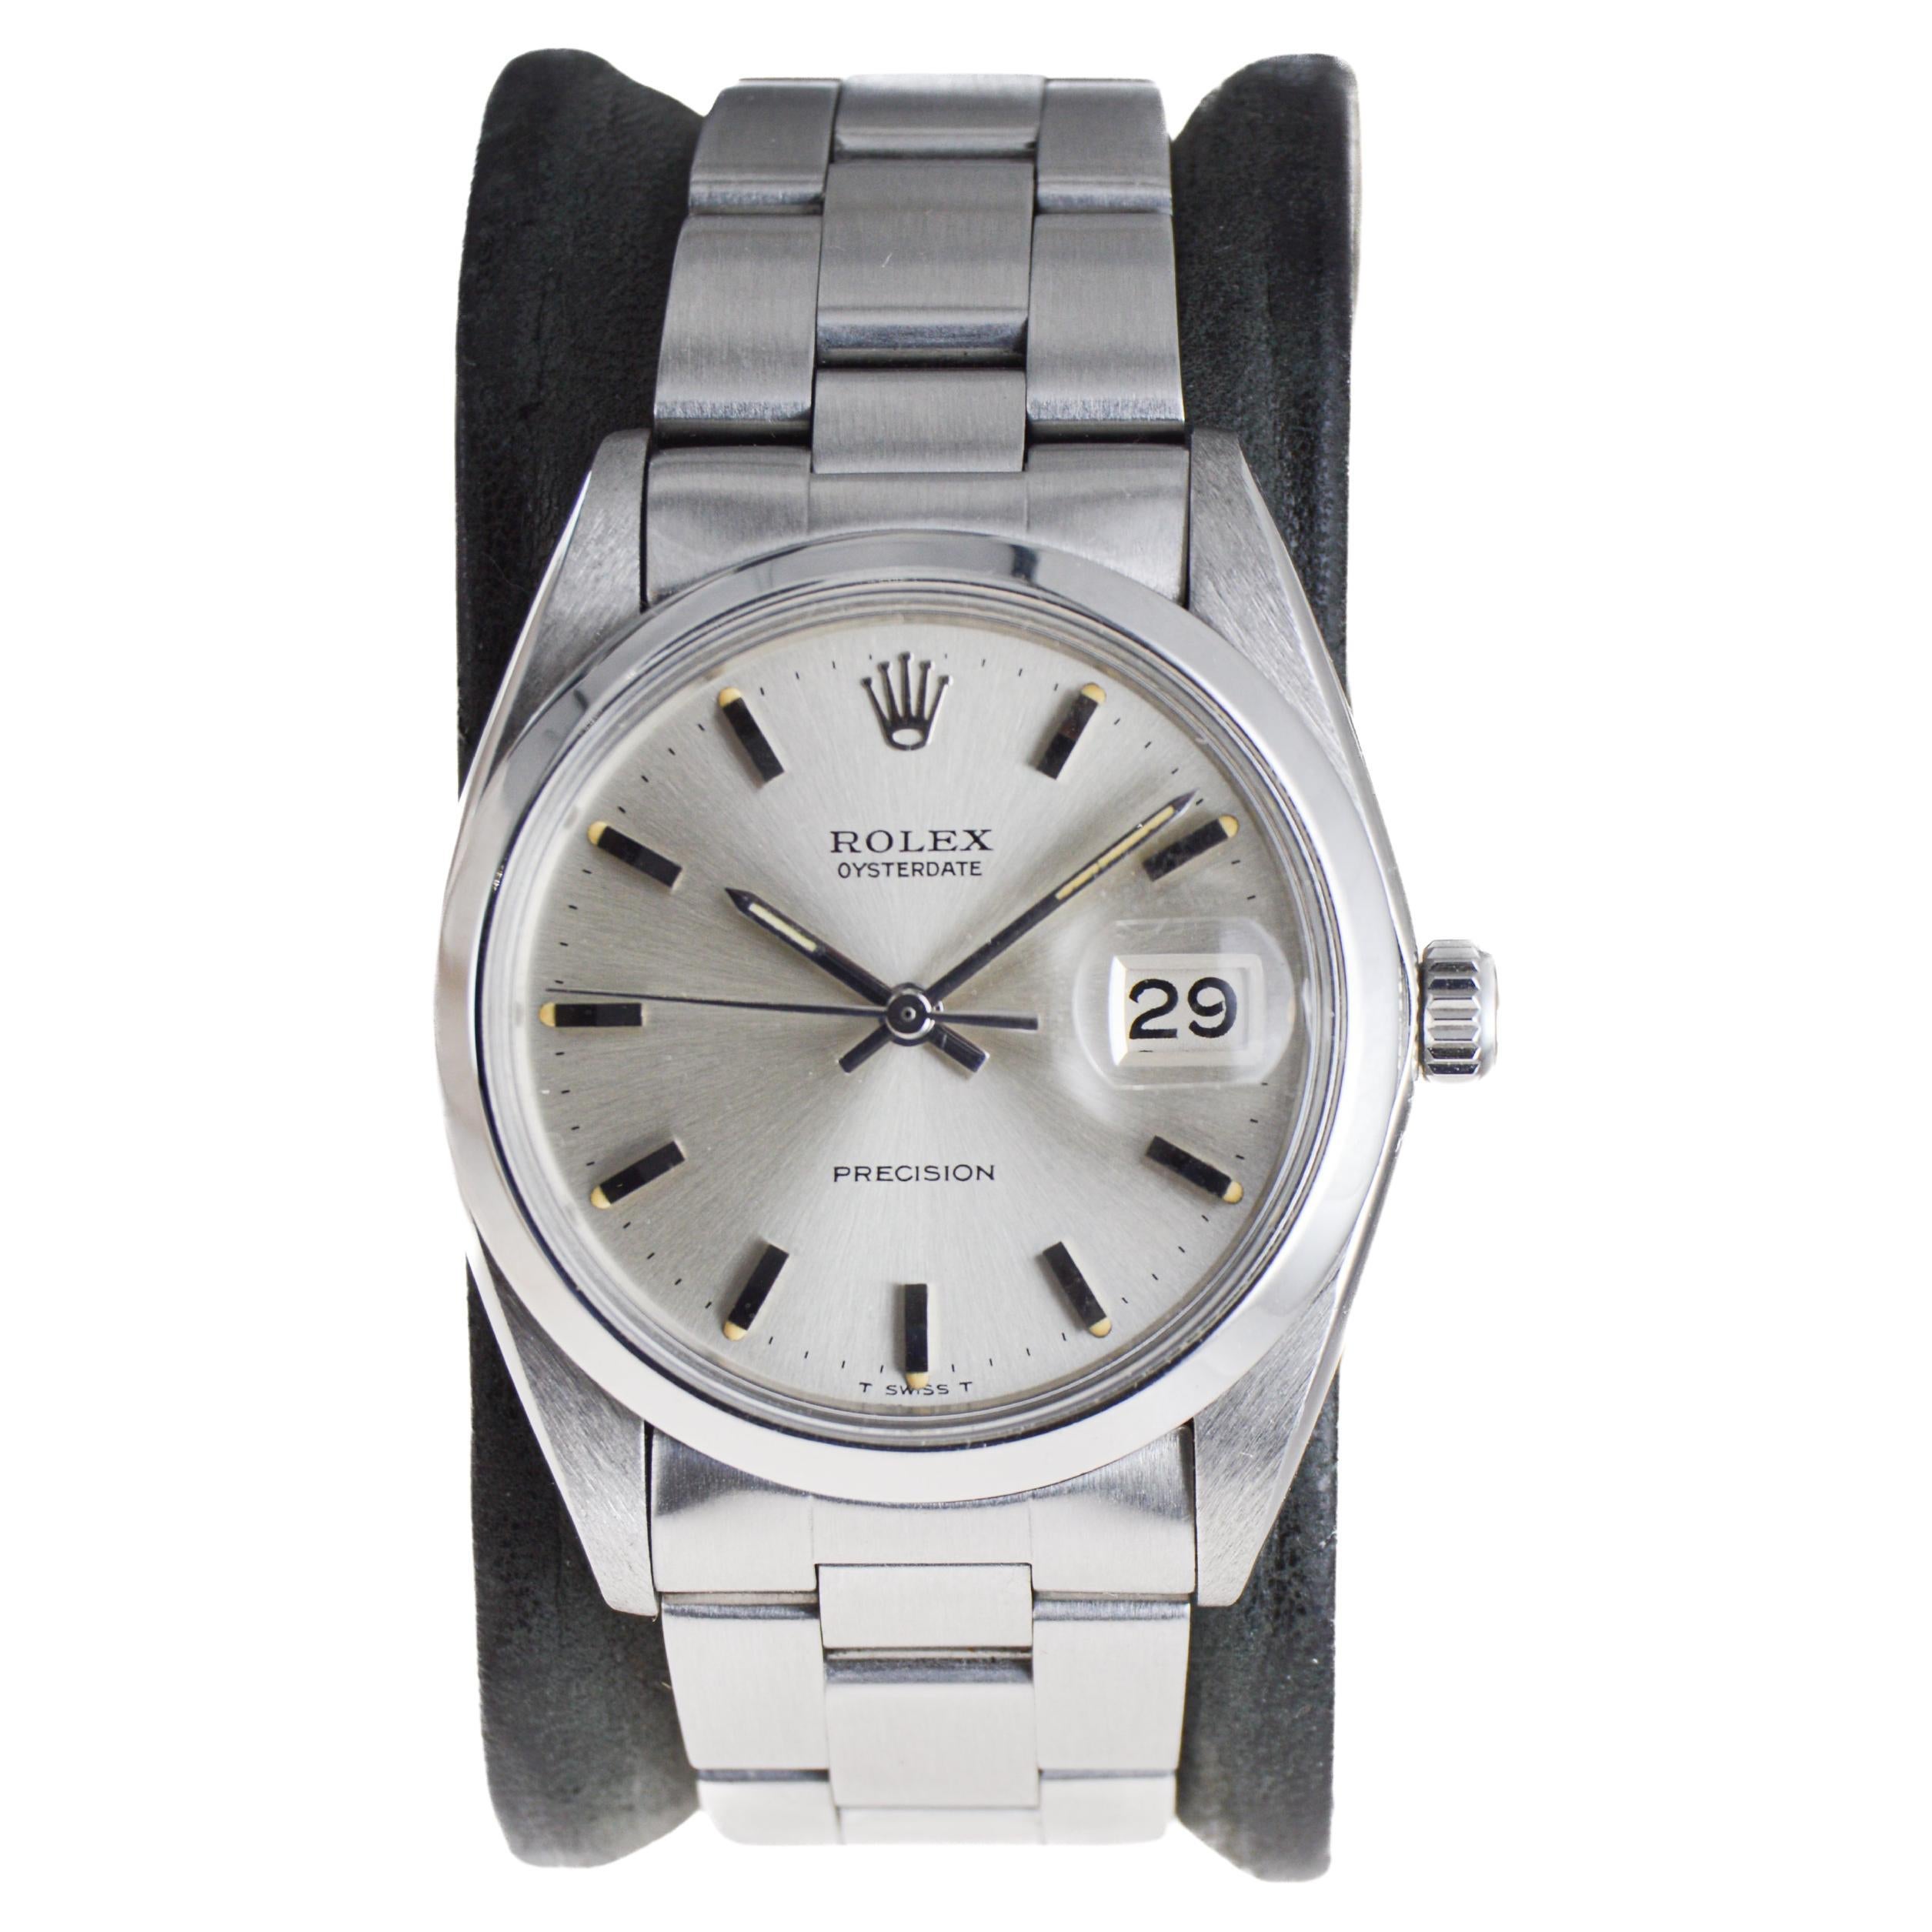 Rolex Stainless Steel Oysterdate with Factory Original Silver Dial circa, 1967